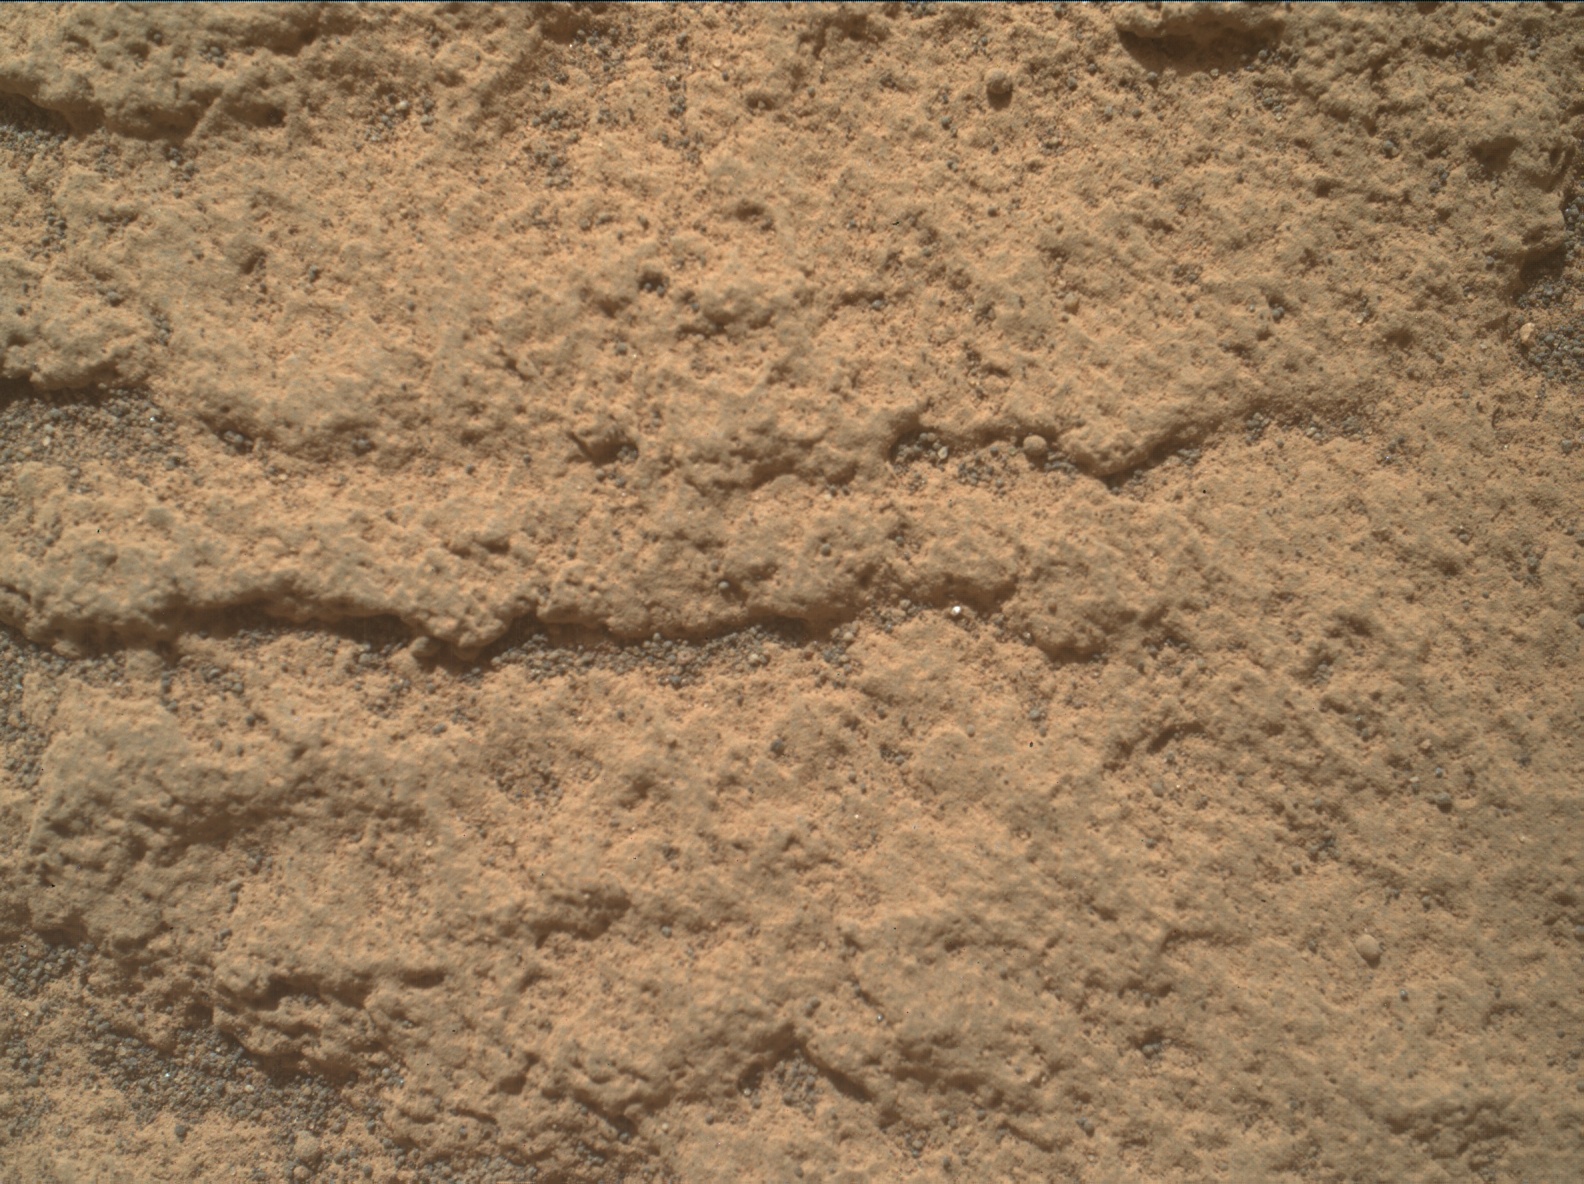 Nasa's Mars rover Curiosity acquired this image using its Mars Hand Lens Imager (MAHLI) on Sol 3419